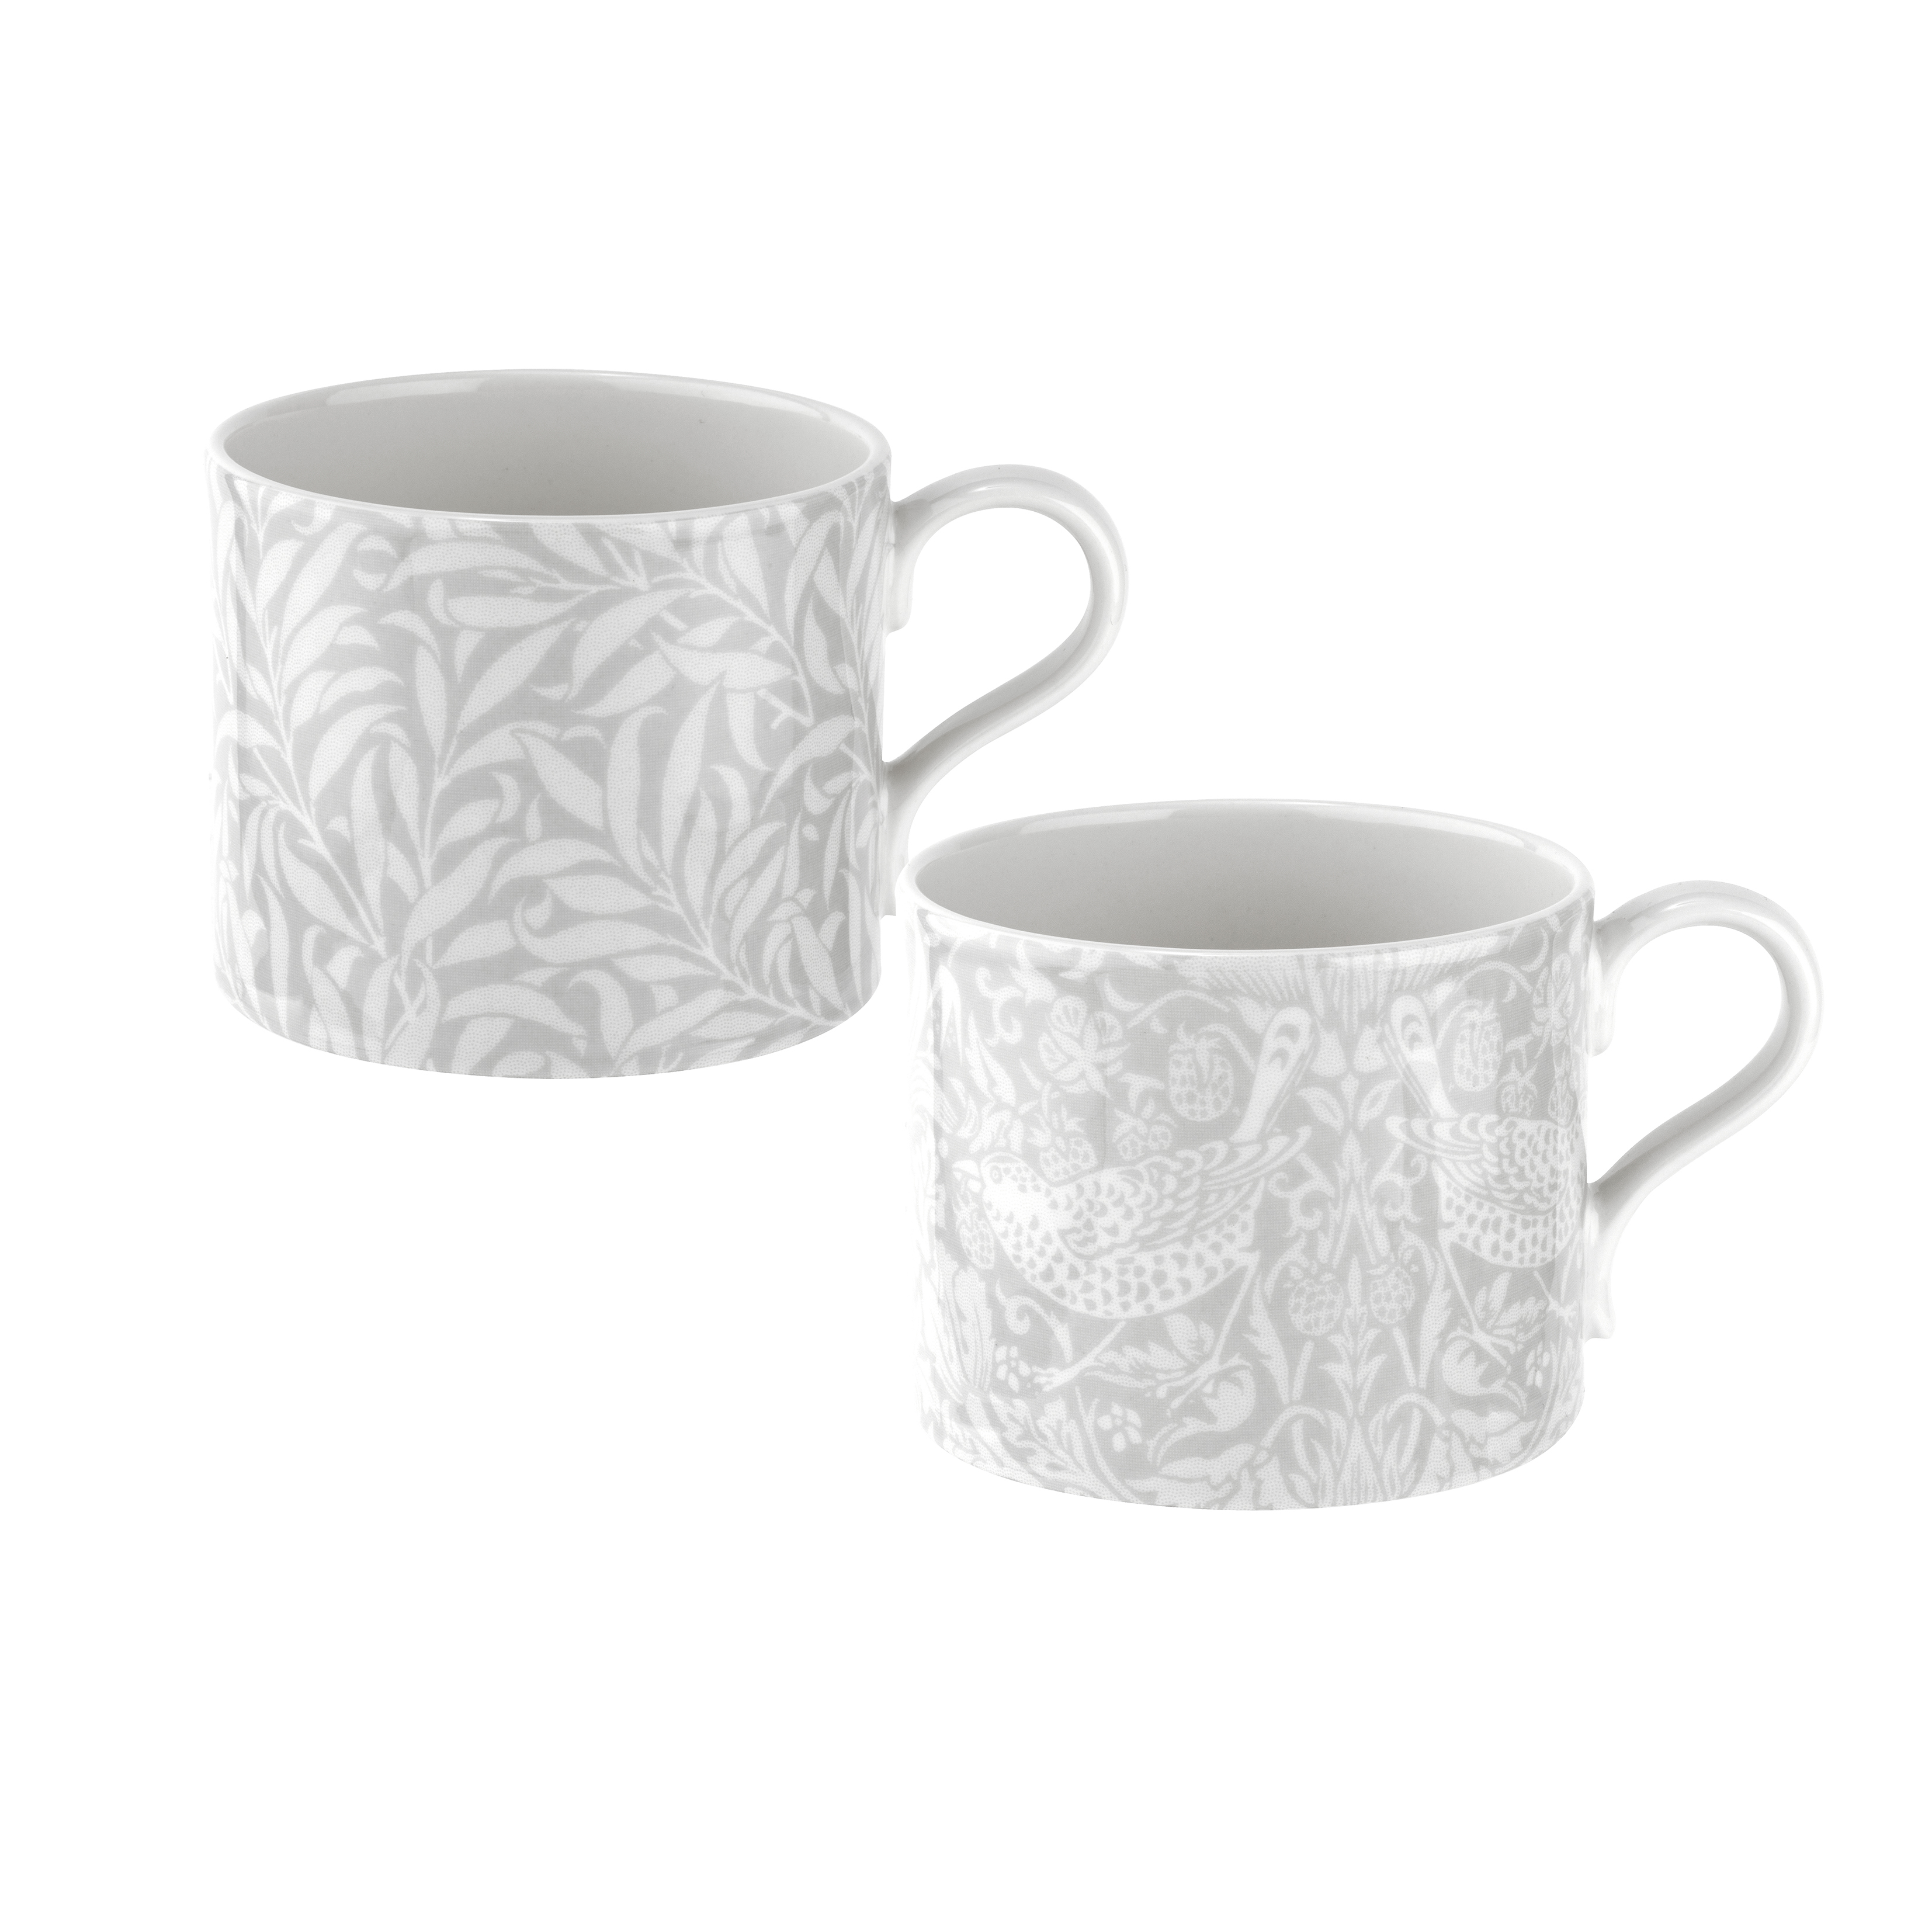 Set of 2 Mugs (Strawberry Thief & Willow Bough) image number null